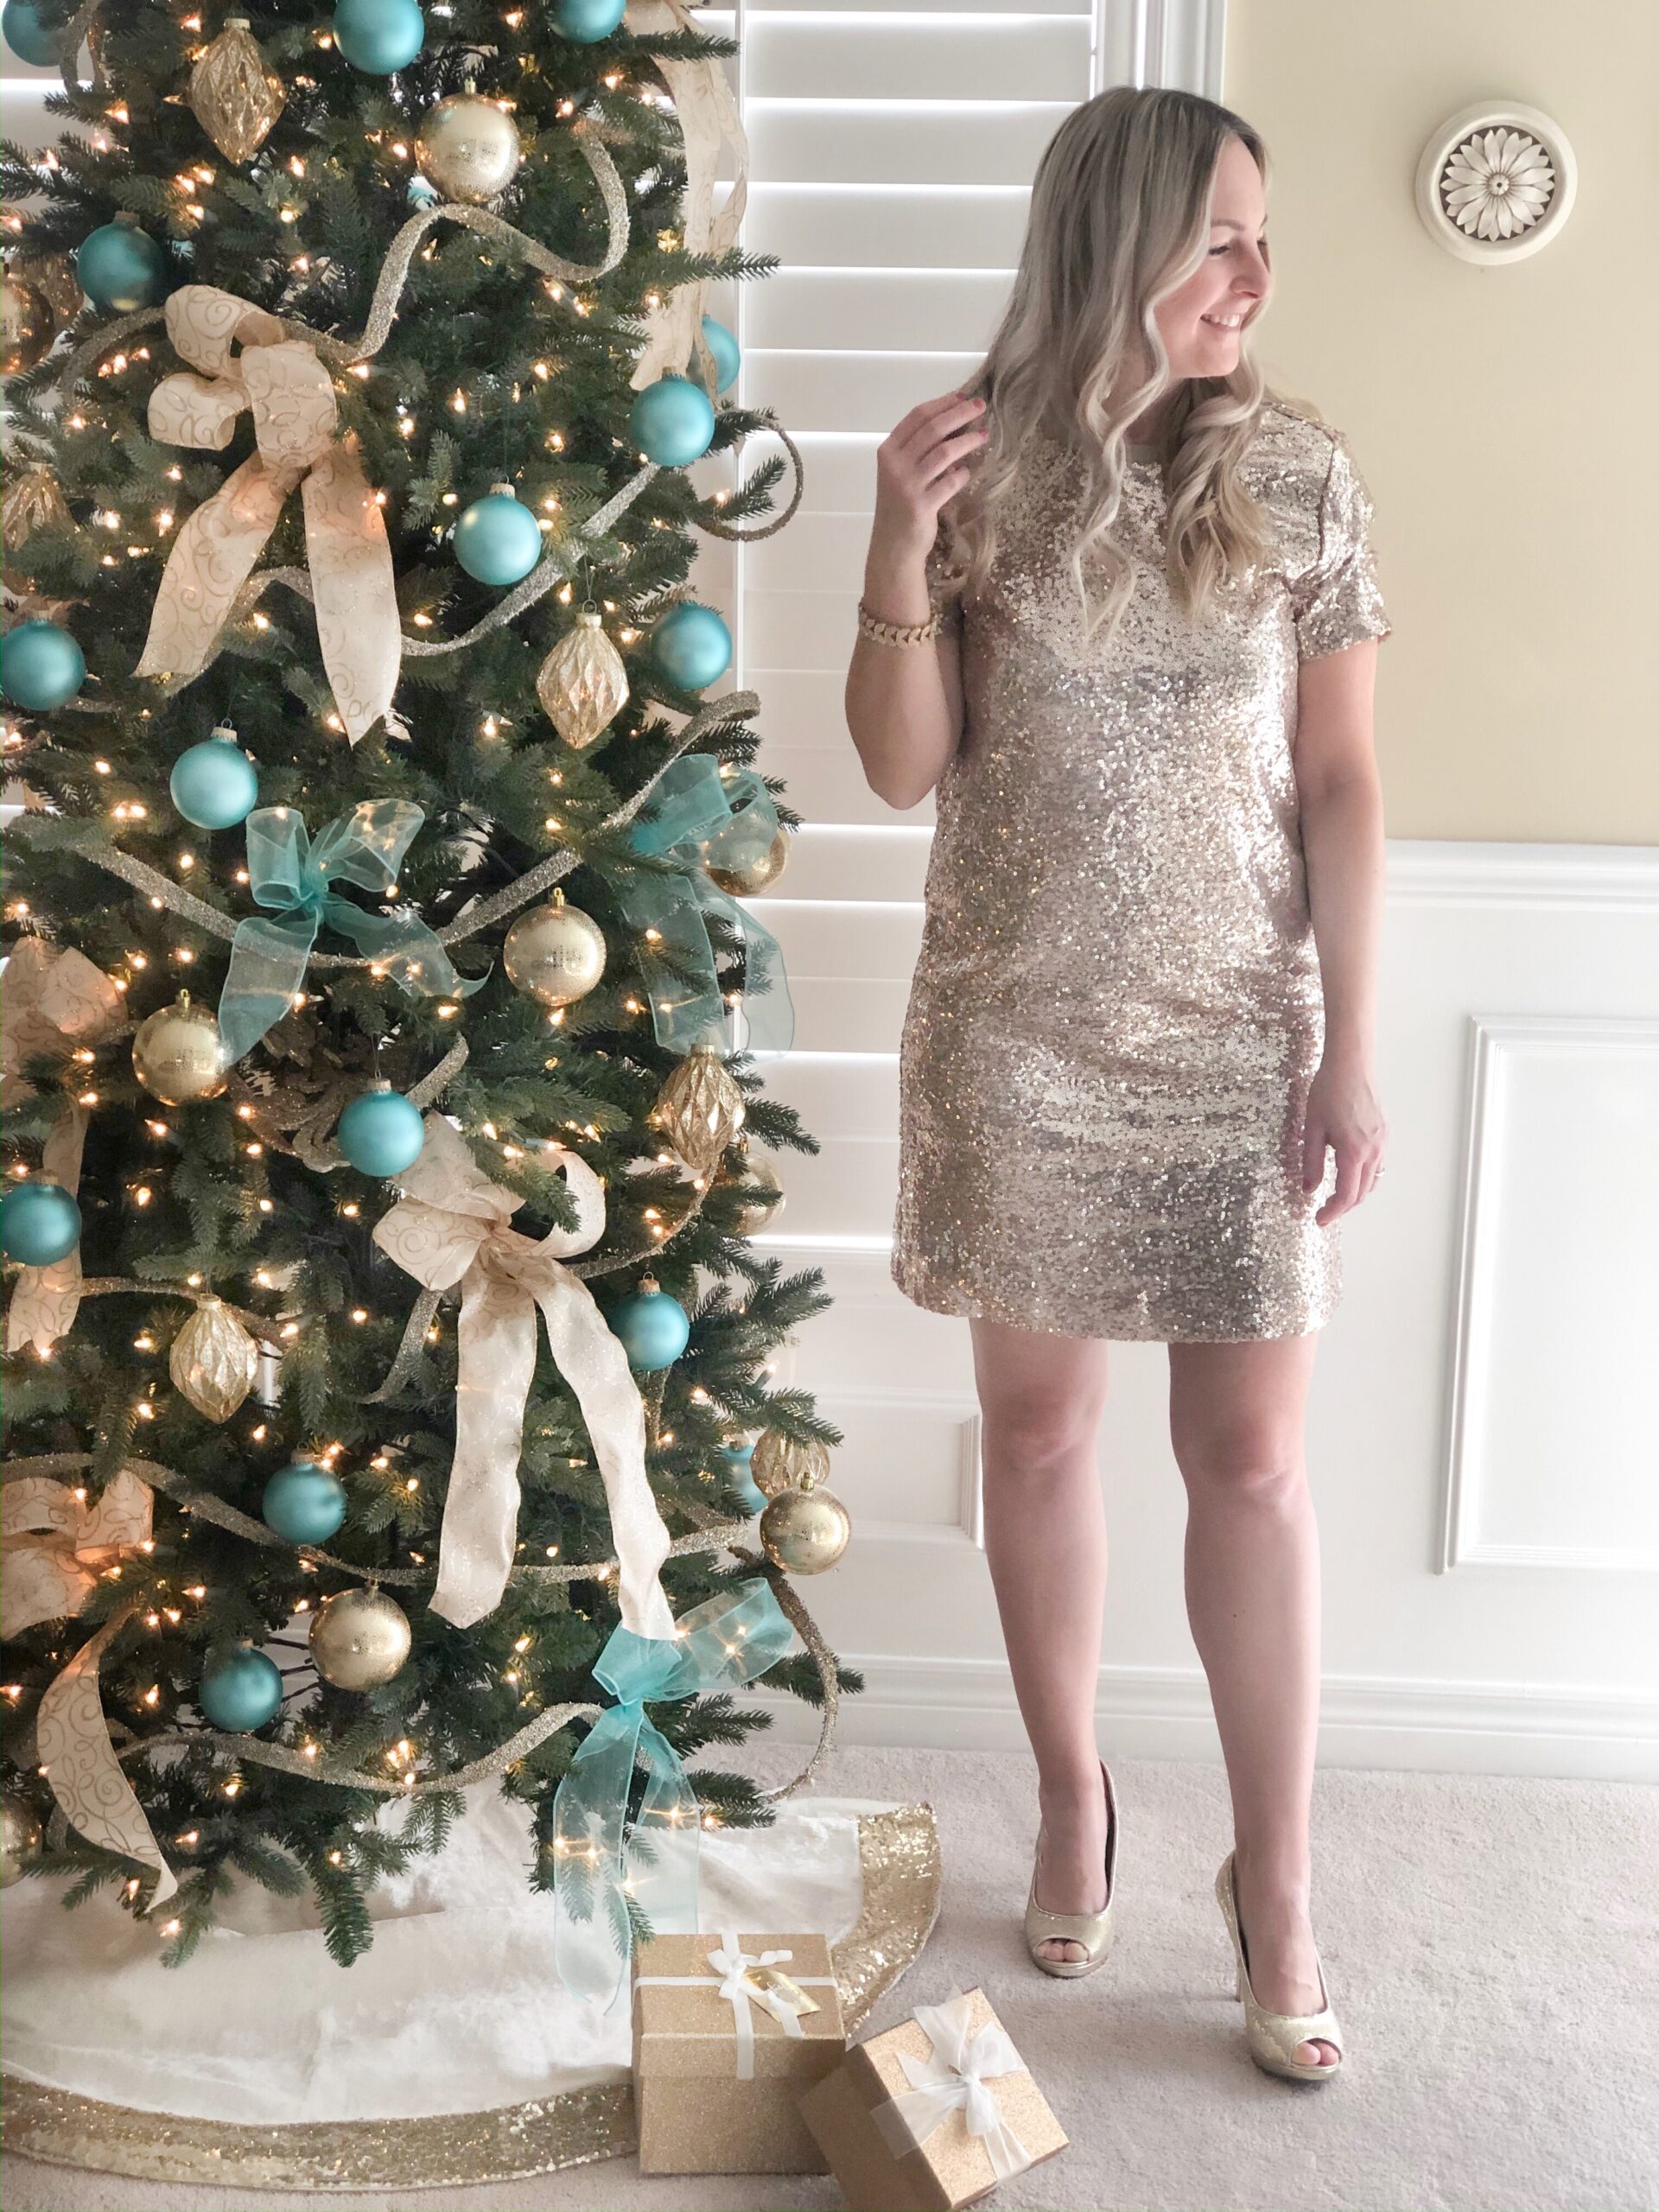 Gold Sparkly Dress for the holidays on Livin' Life with Style